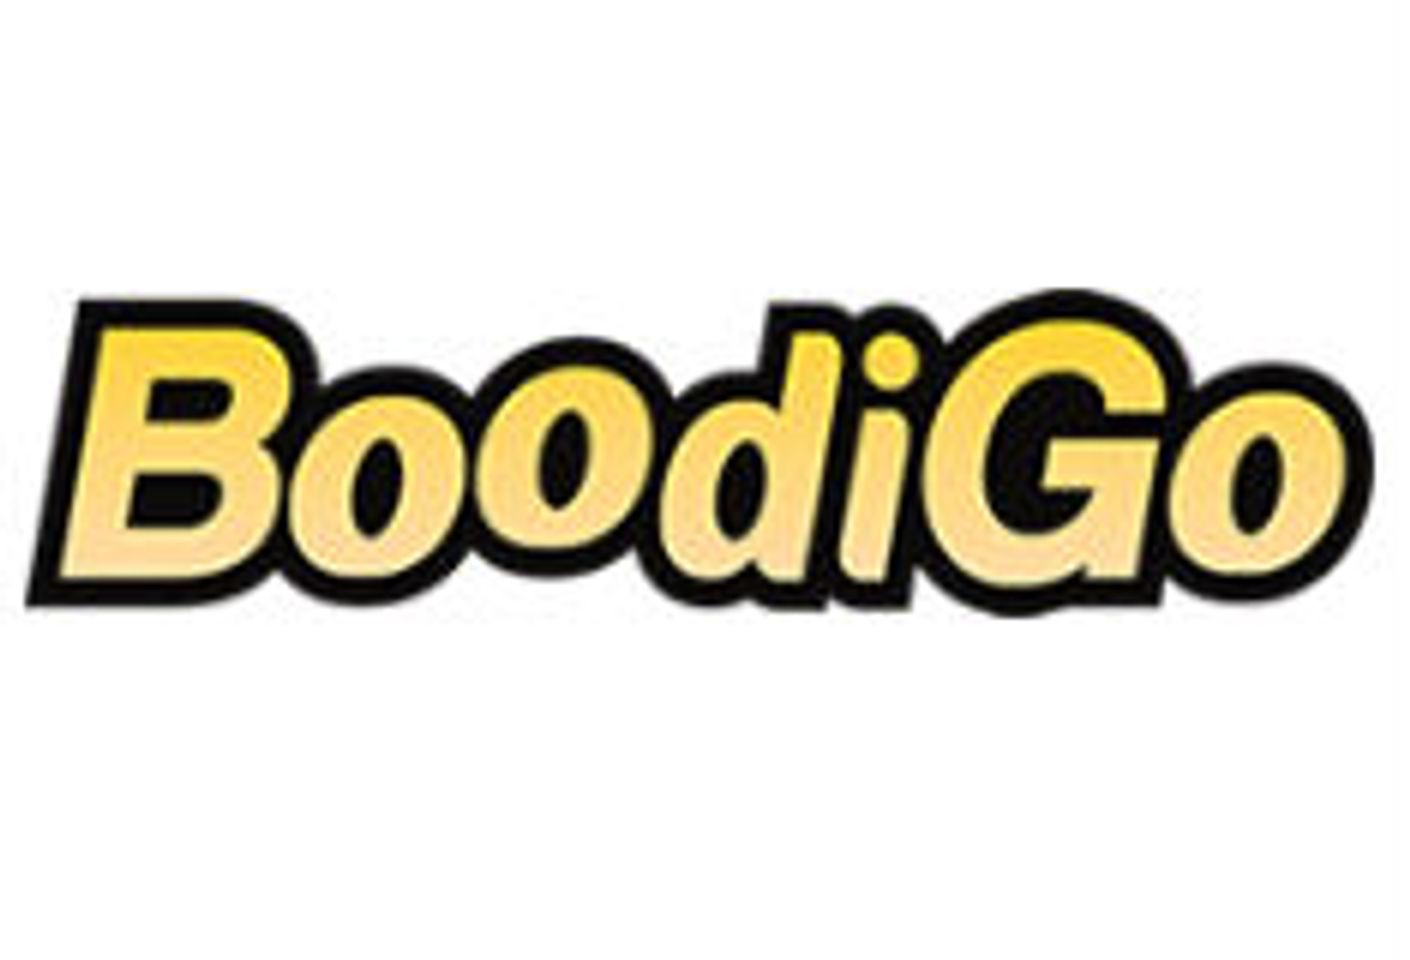 BoodiGo Partners with PornGuardian to Limit Known Piracy Site Results